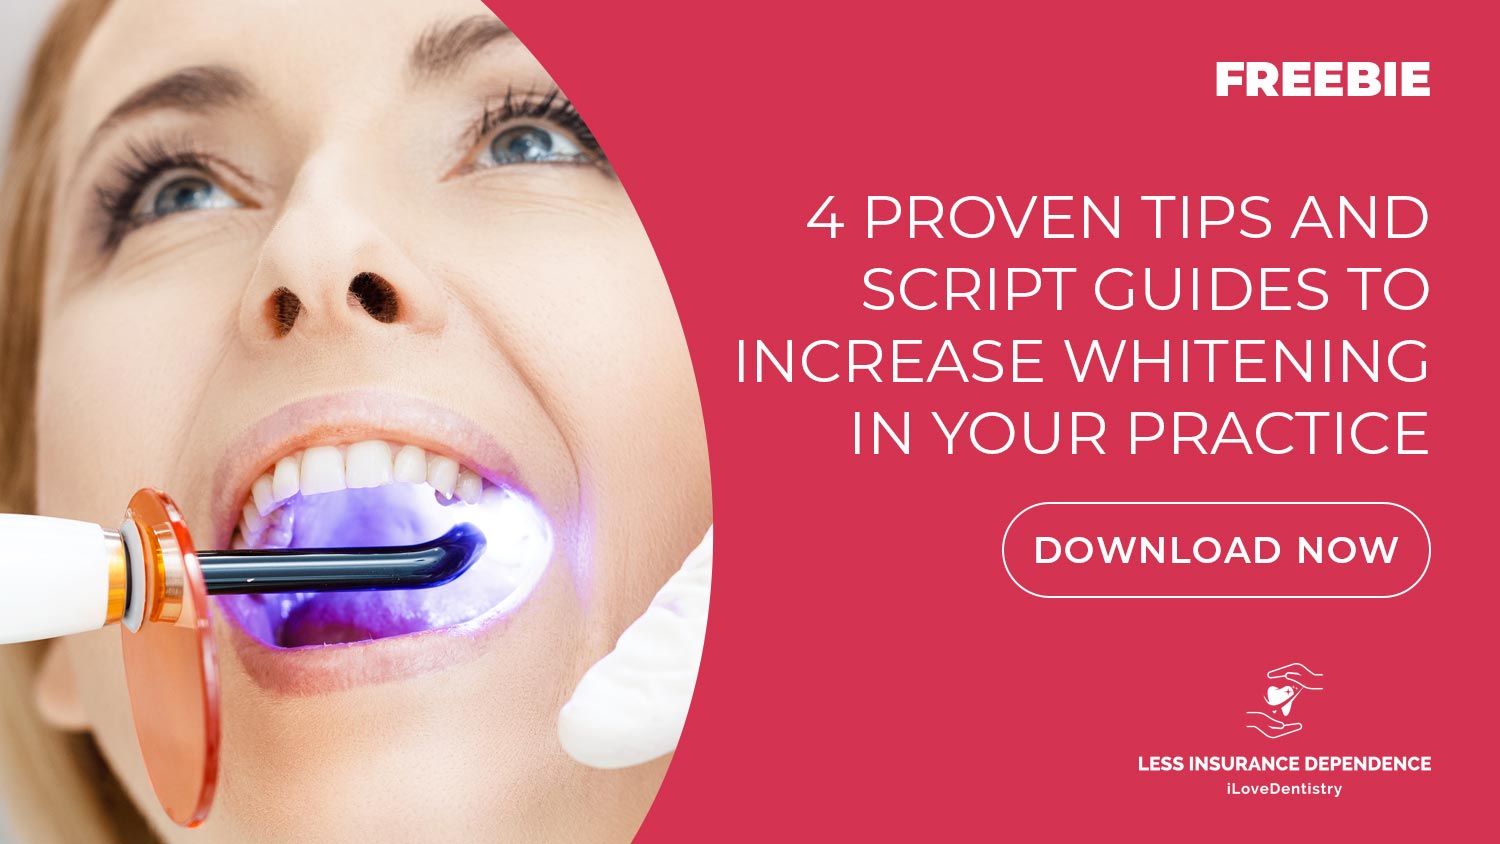 4 Proven Tips and Script Guides to Increase Whitening in Your Practice